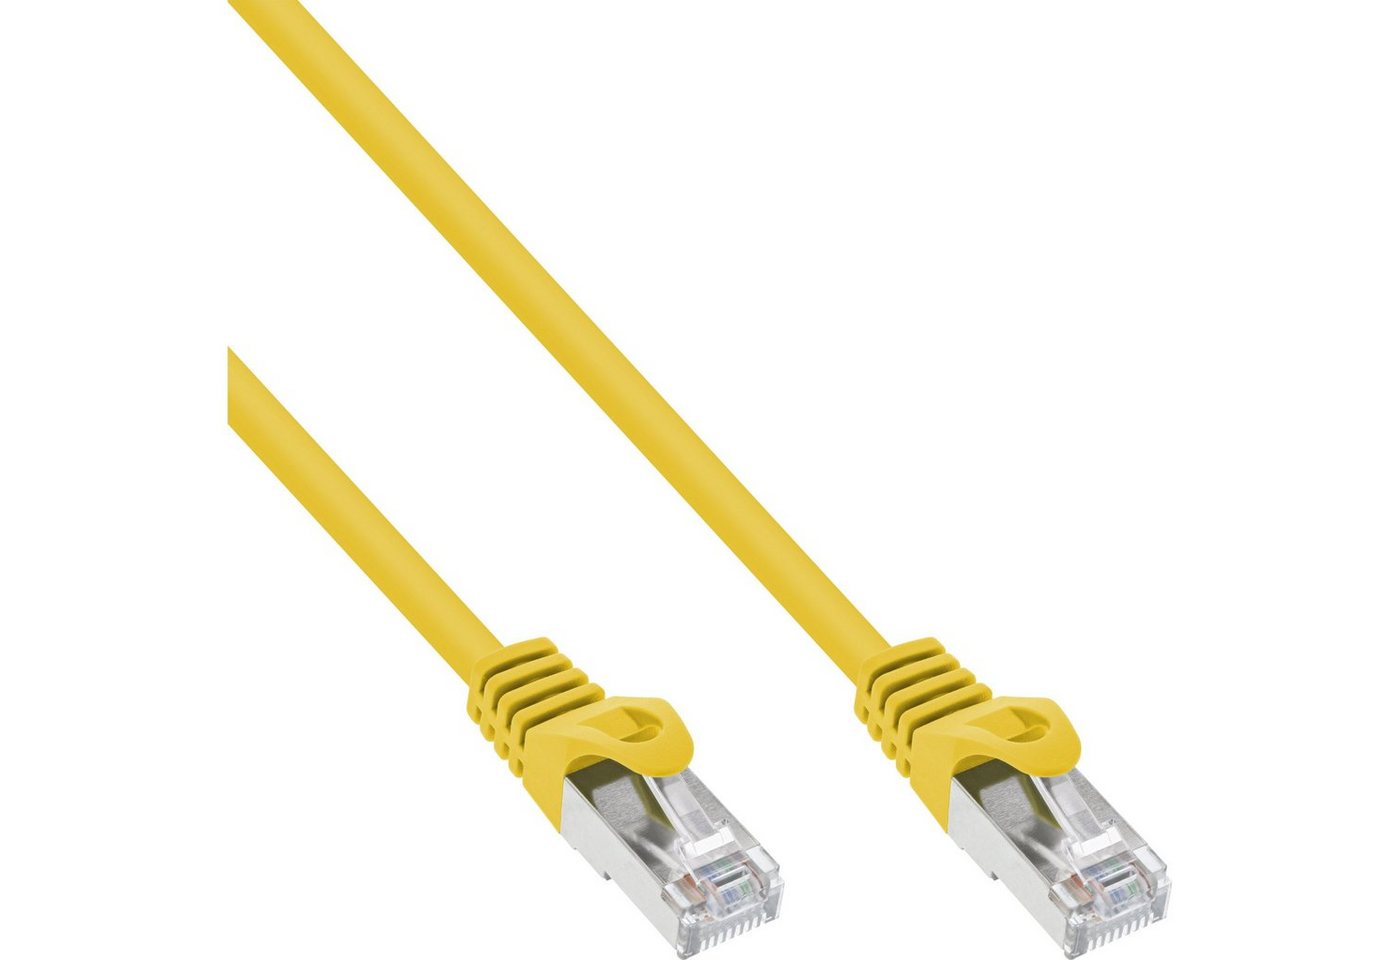 INTOS ELECTRONIC AG InLine® Patchkabel, SF/UTP, Cat.5e, gelb, 25m LAN-Kabel von INTOS ELECTRONIC AG